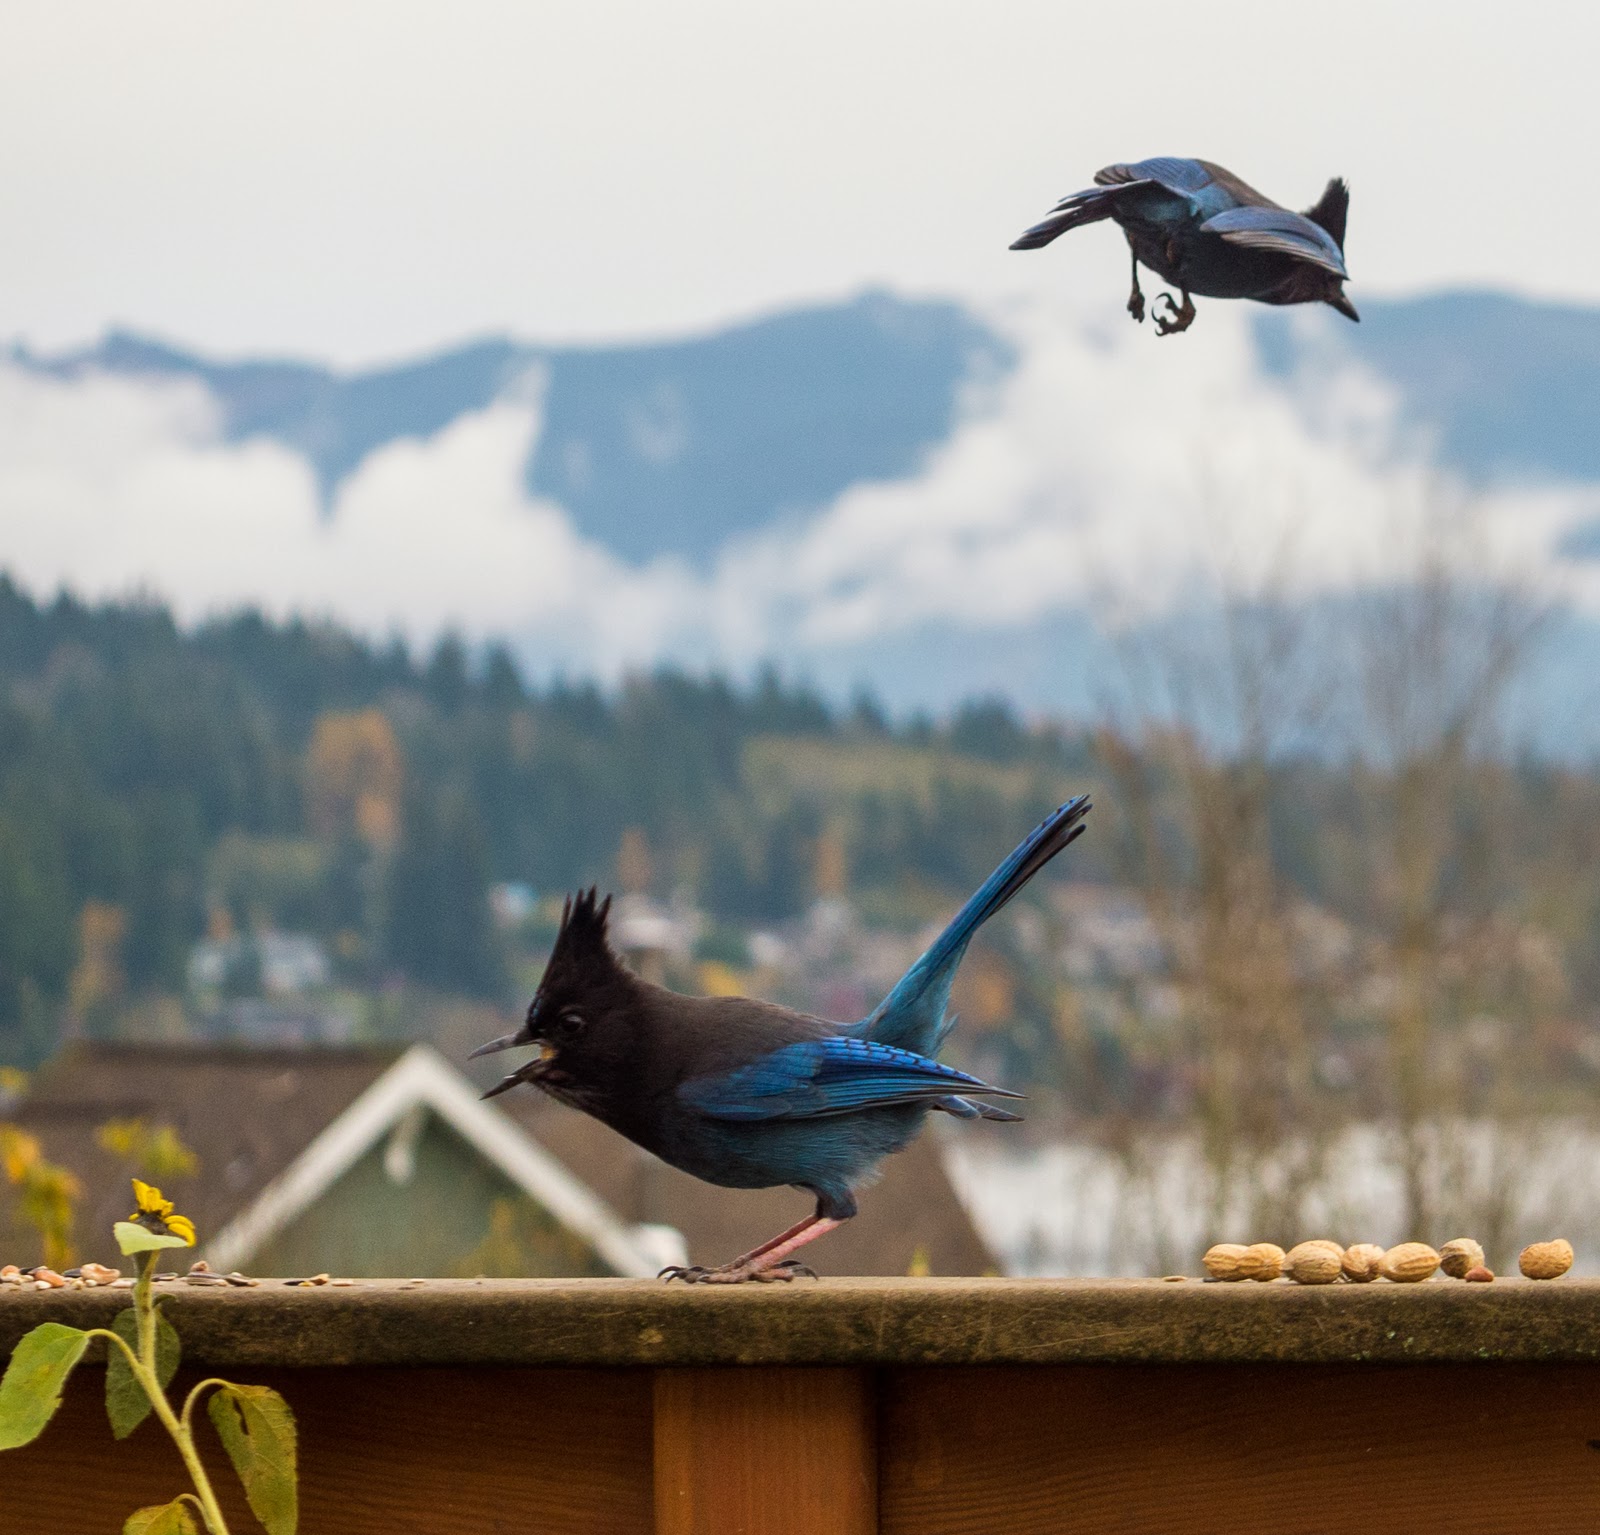 Chaikins of Bellingham: Dancing Jays and Crows and the Big Guy Watching